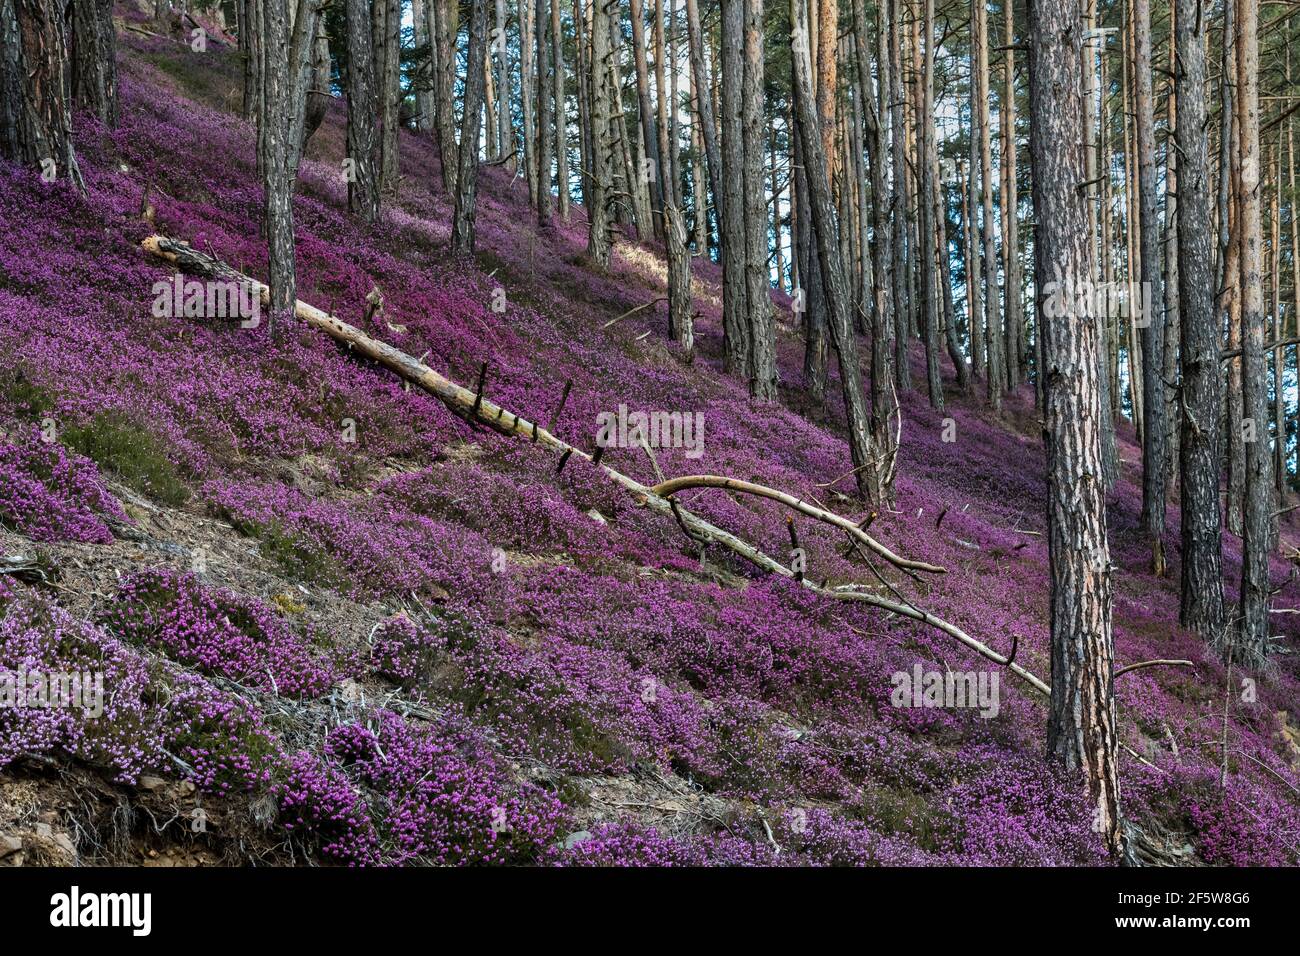 Flowering snow heather (Erica carnea) in the forest, Styria, Austria Stock Photo